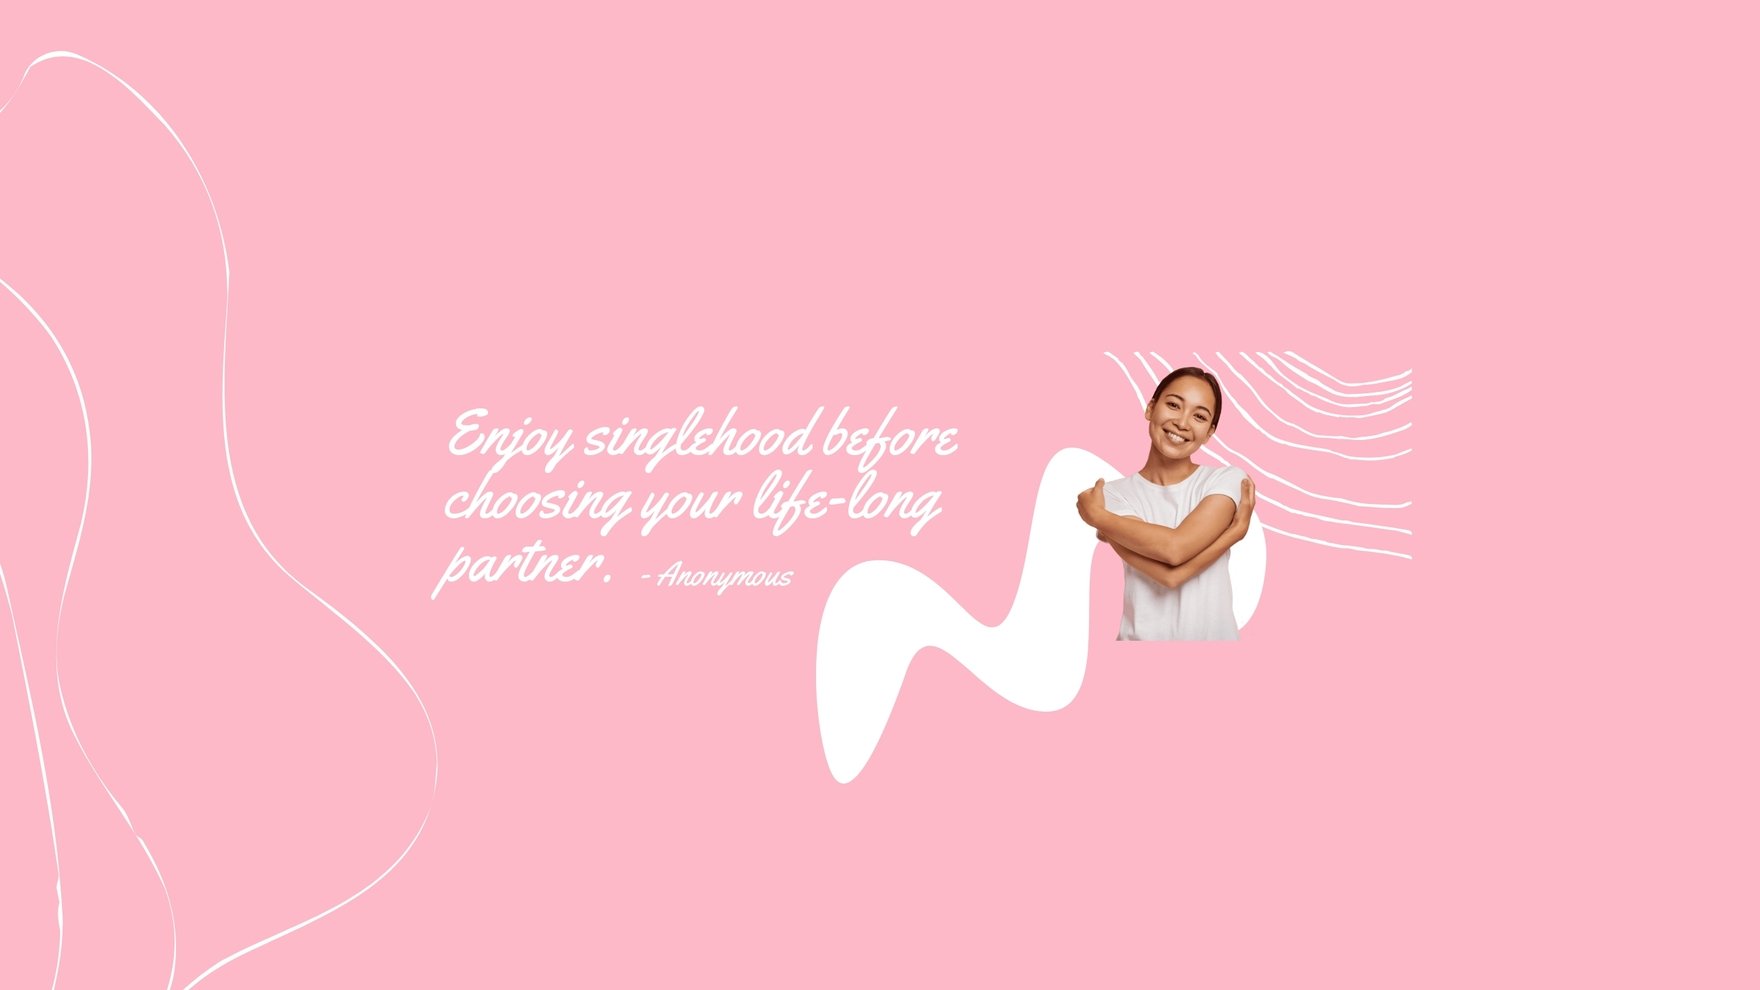 Free Singles Day Quote Youtube Banner Template